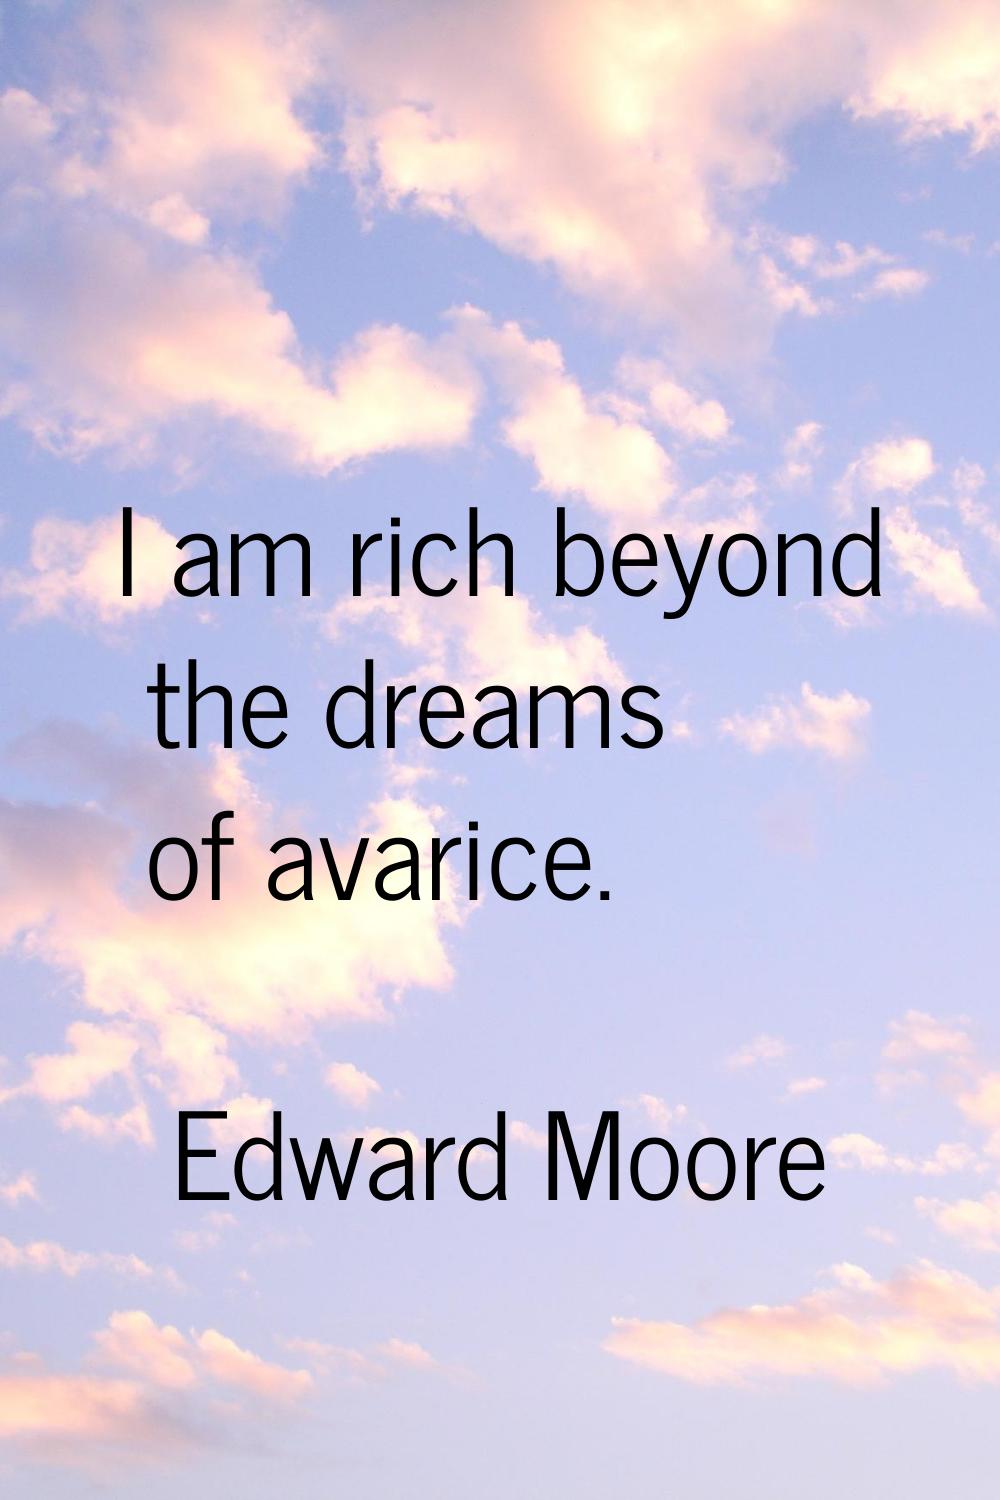 I am rich beyond the dreams of avarice.